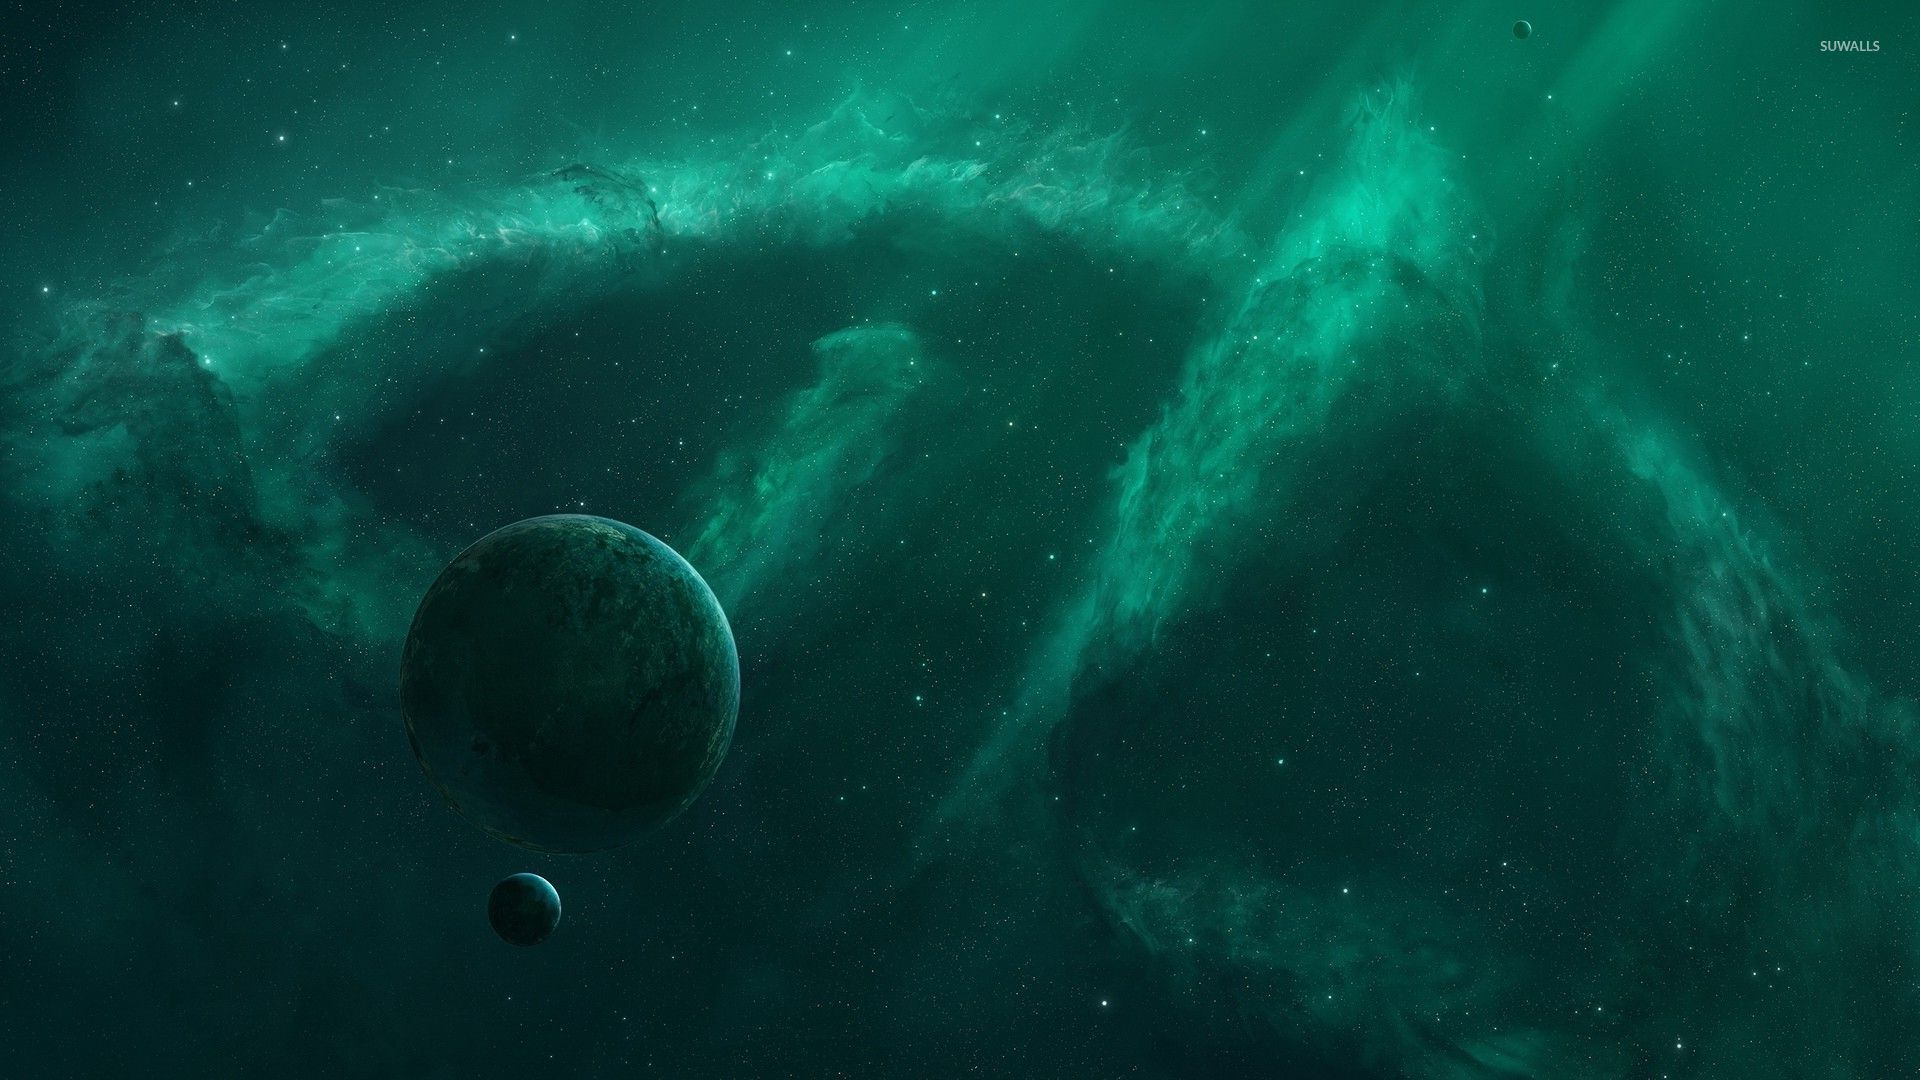 Green Planets In Space Wallpapers